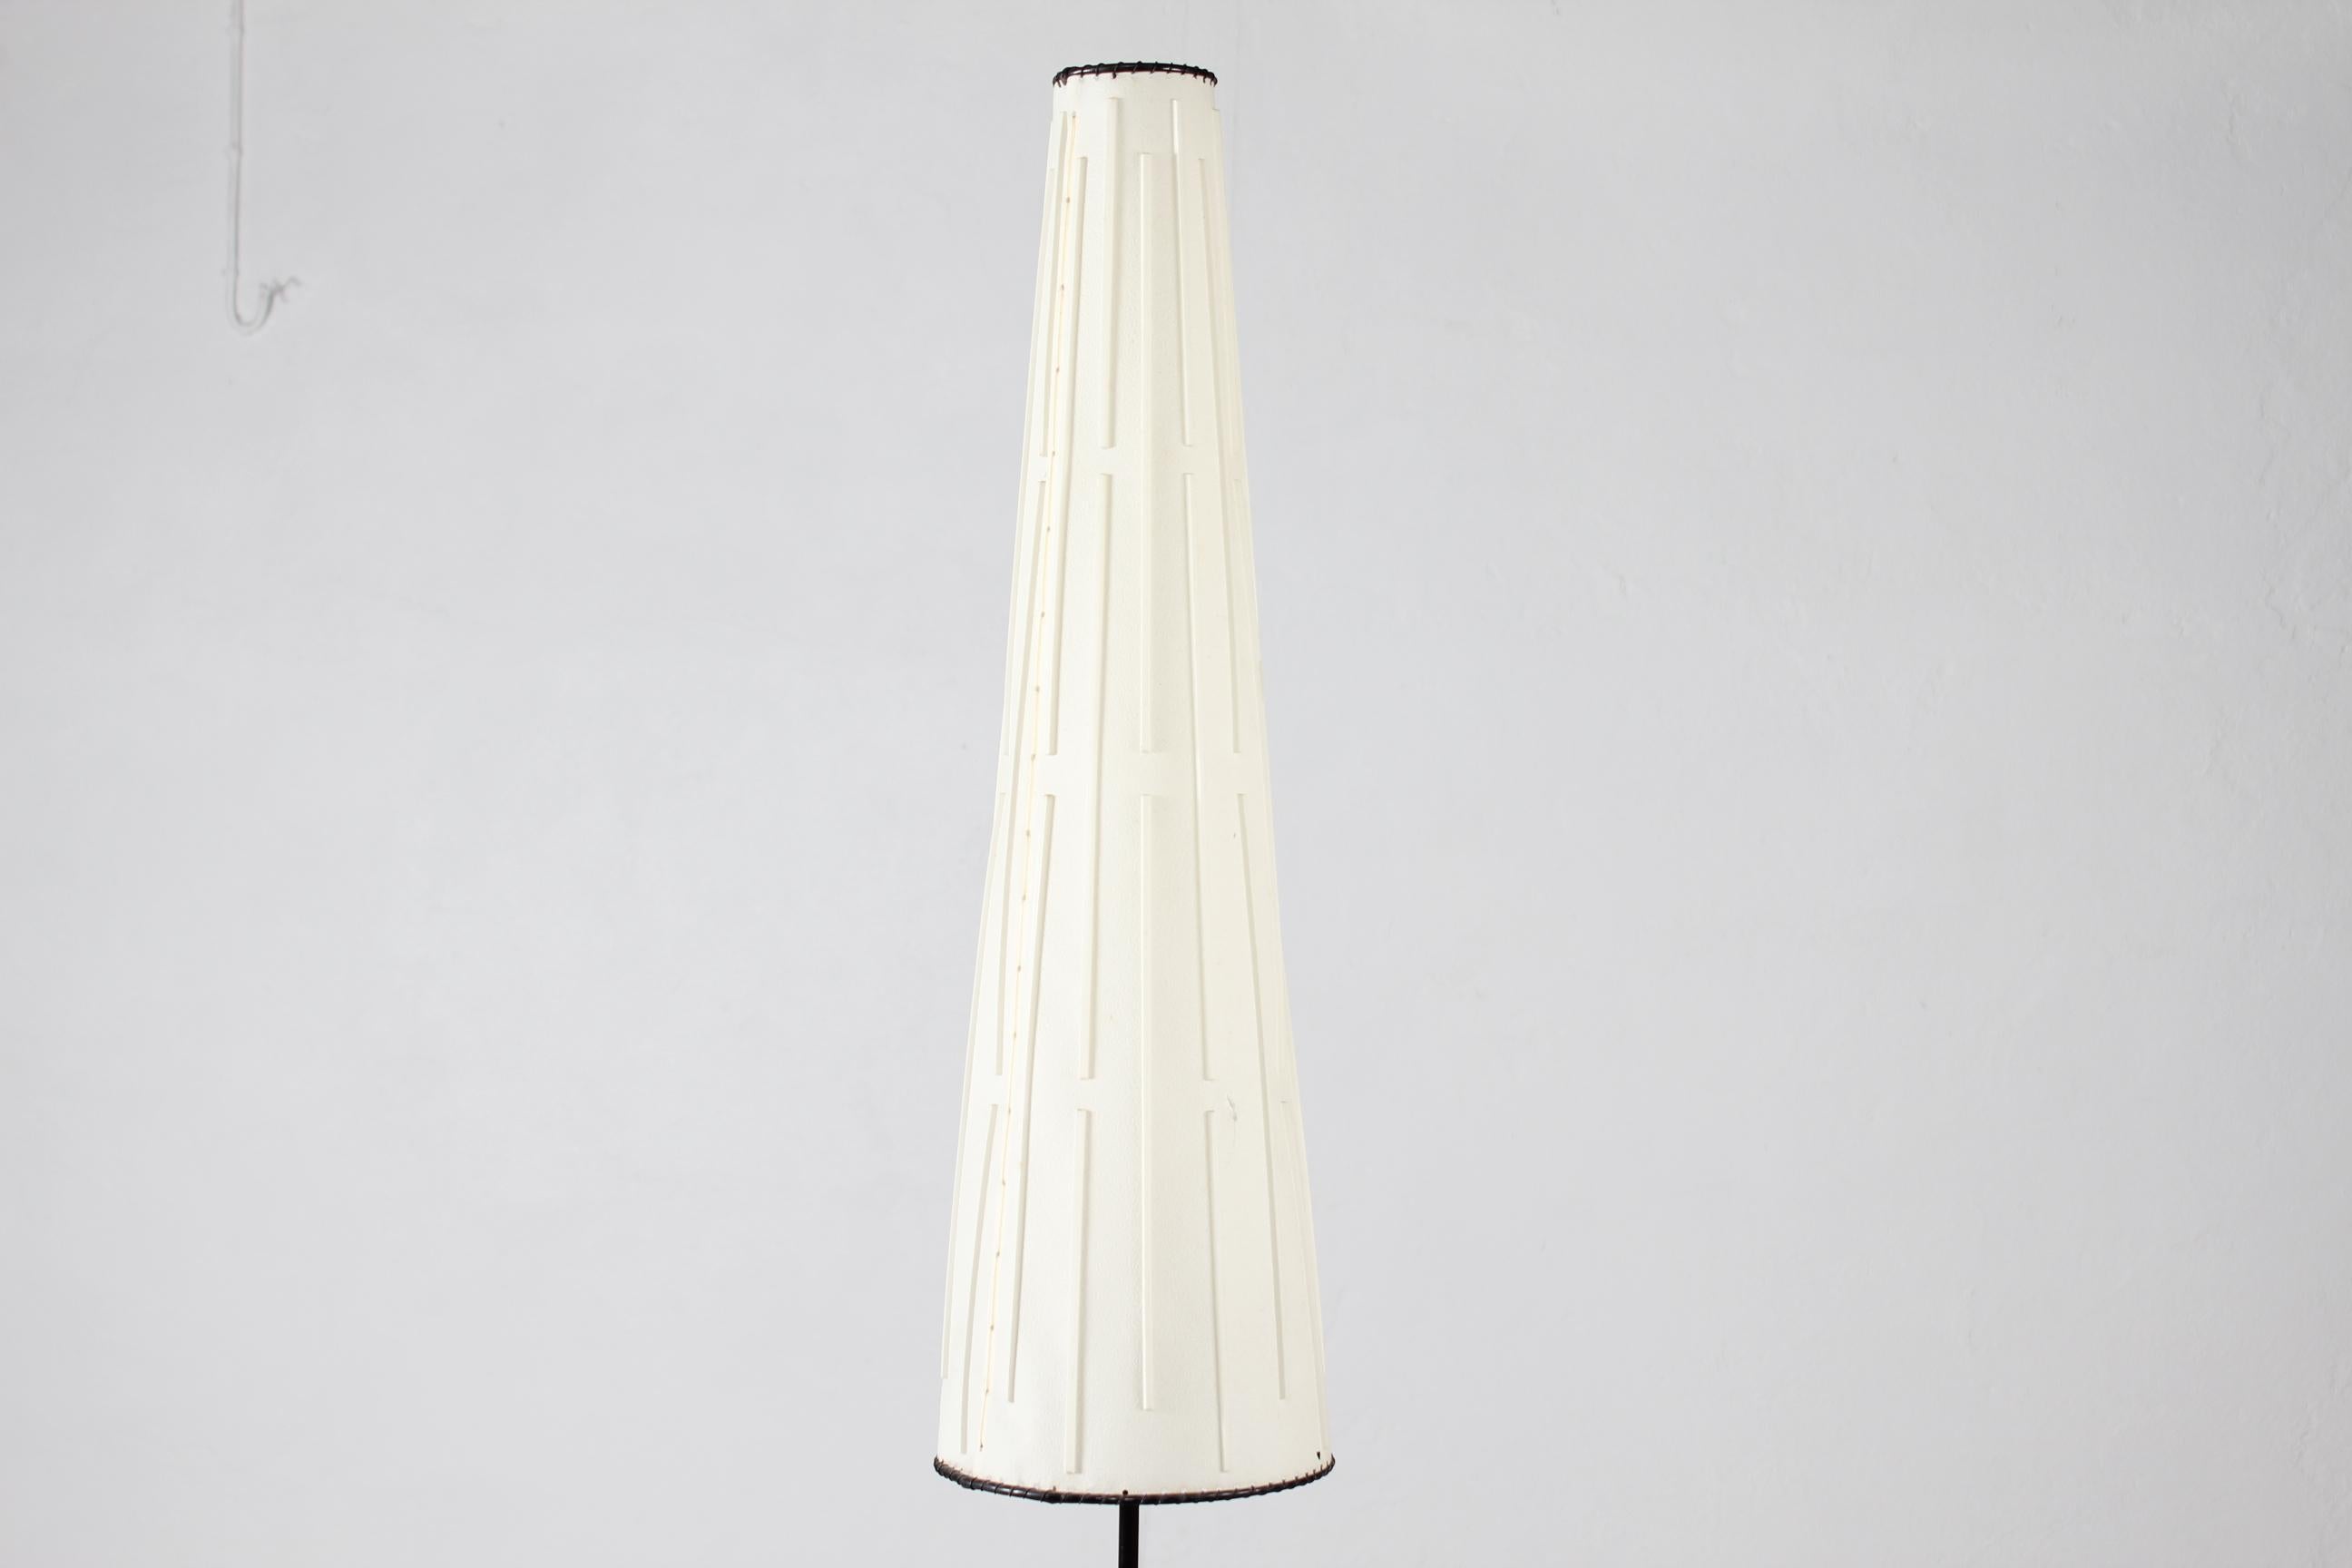 Tall and very slim floor lamp designed by Danish Svend Aage Holm Sørensen (1913-2004). and made at his own workshop.
Slightly tapering conical shade with geometrical decorations in relief. 
The lamp foot is made of cast iron with blue lacquer,